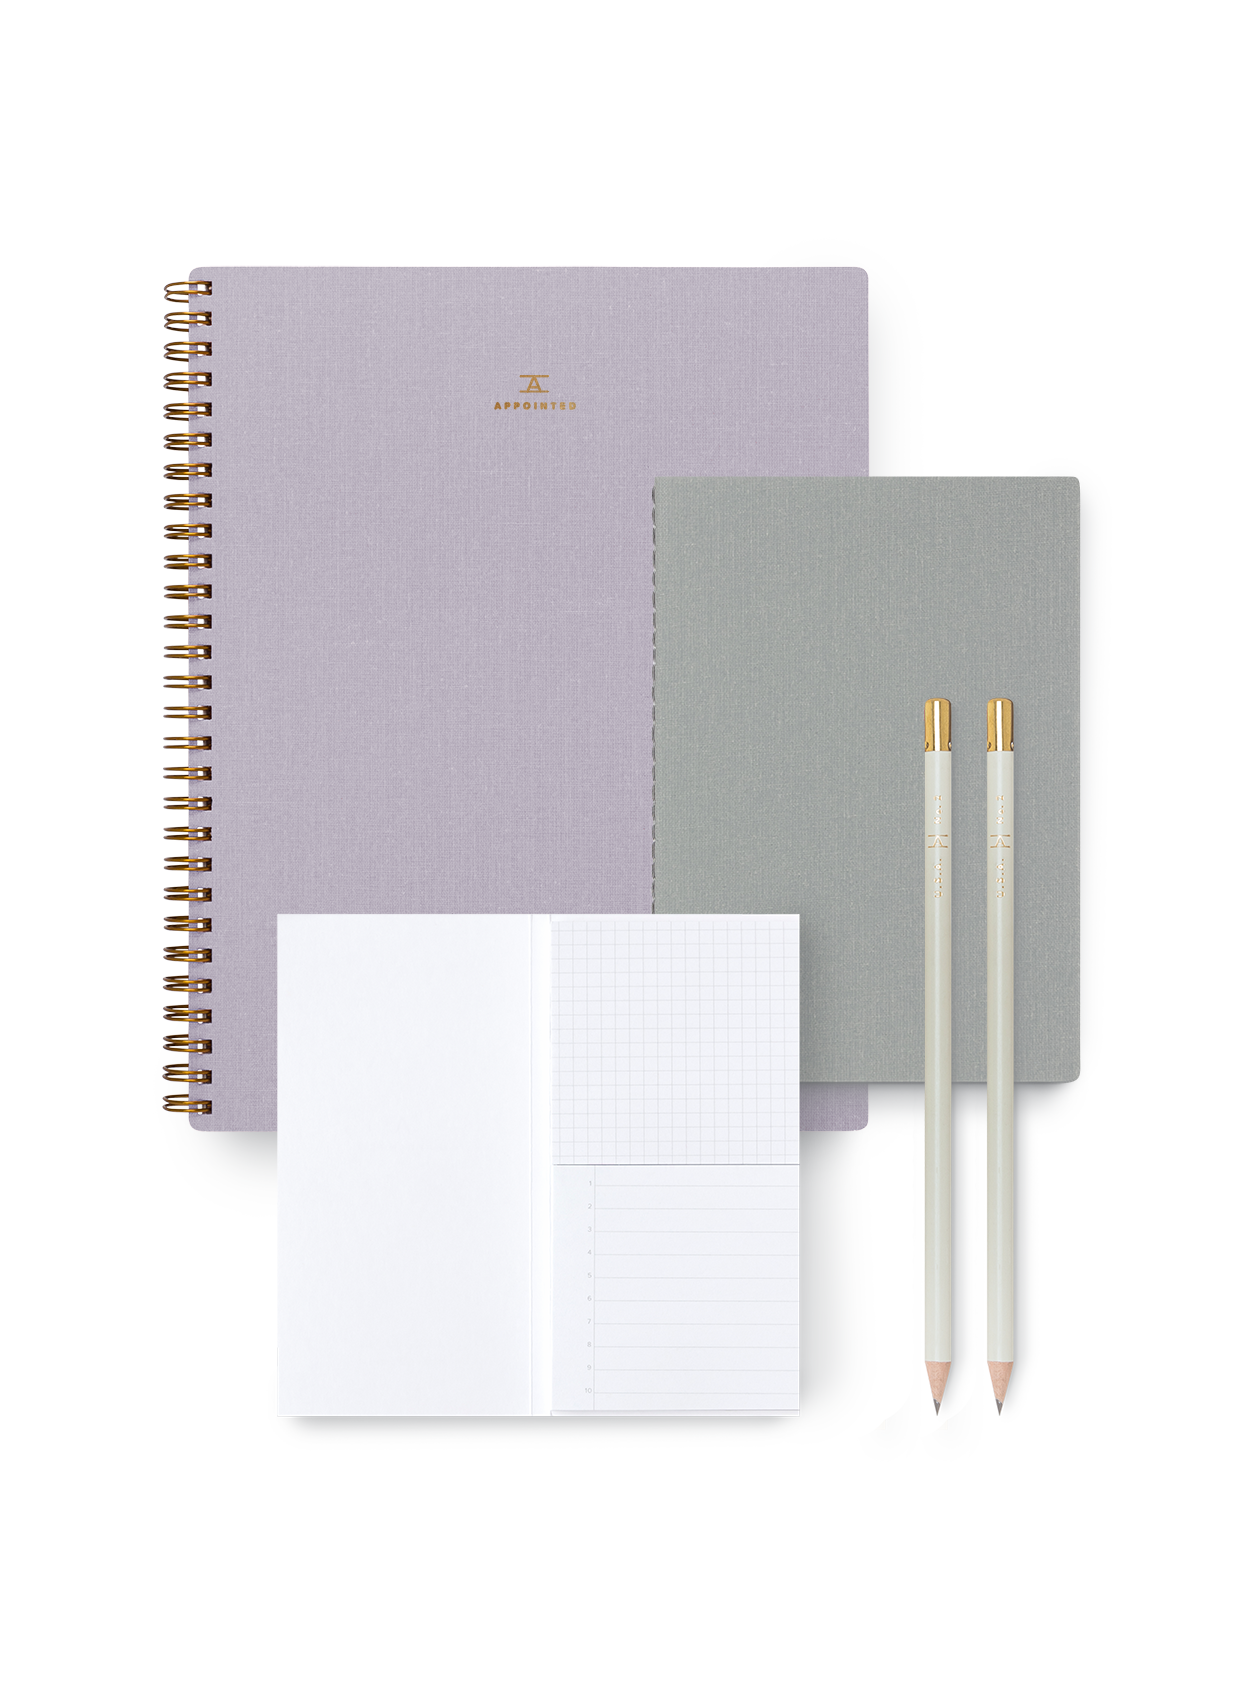 Starter Set including notebook, accessories, and more || Lavender Gray